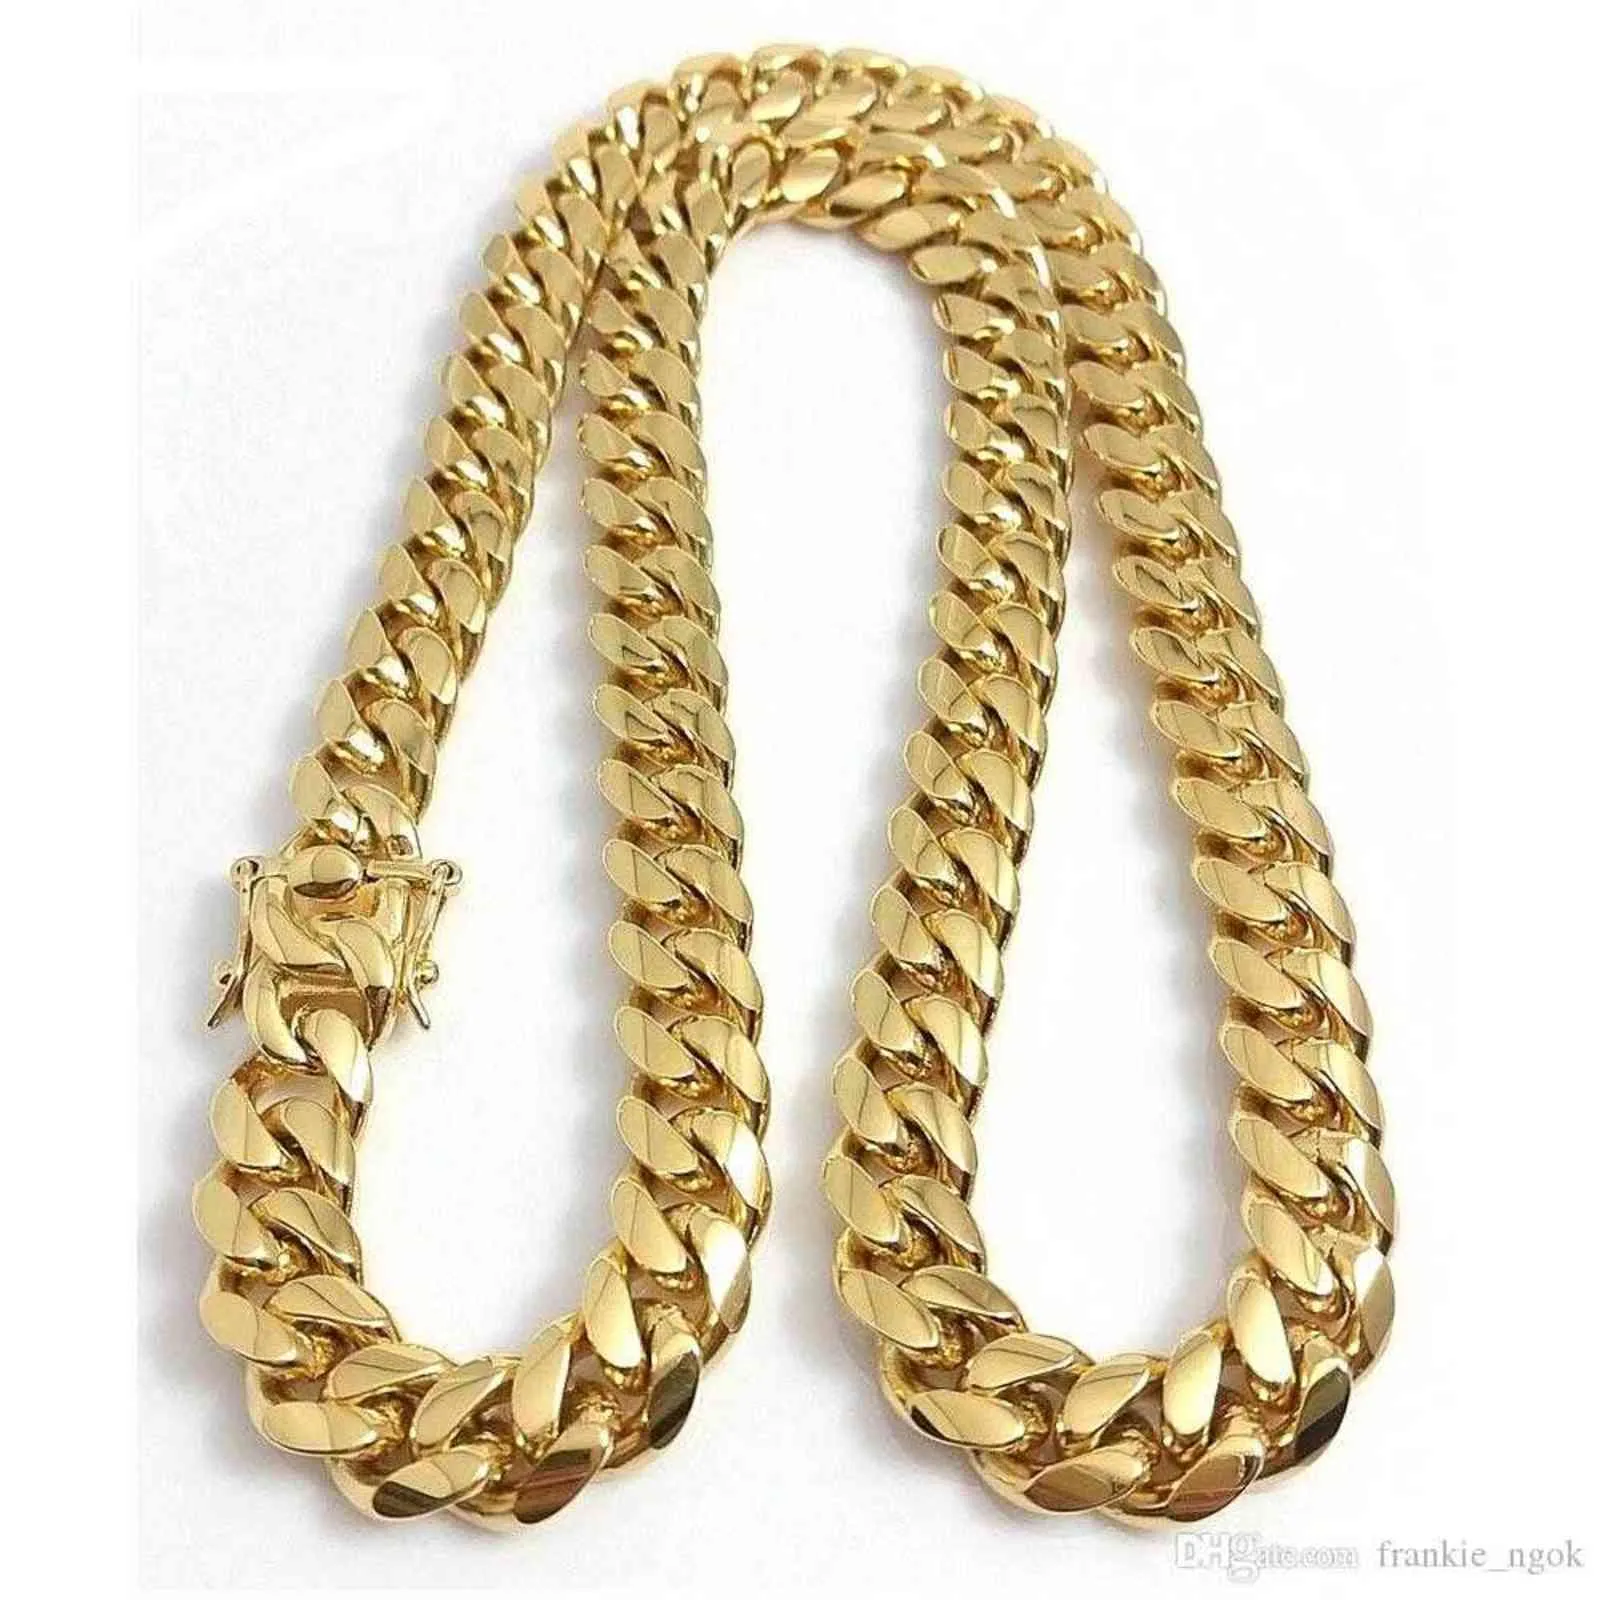 Stainless Steel Jewelry 18K Gold Plated High Polished  Cuban Link Necklace Men Punk 15mm Curb Chain Double Safety Clasp 18inch-30inch